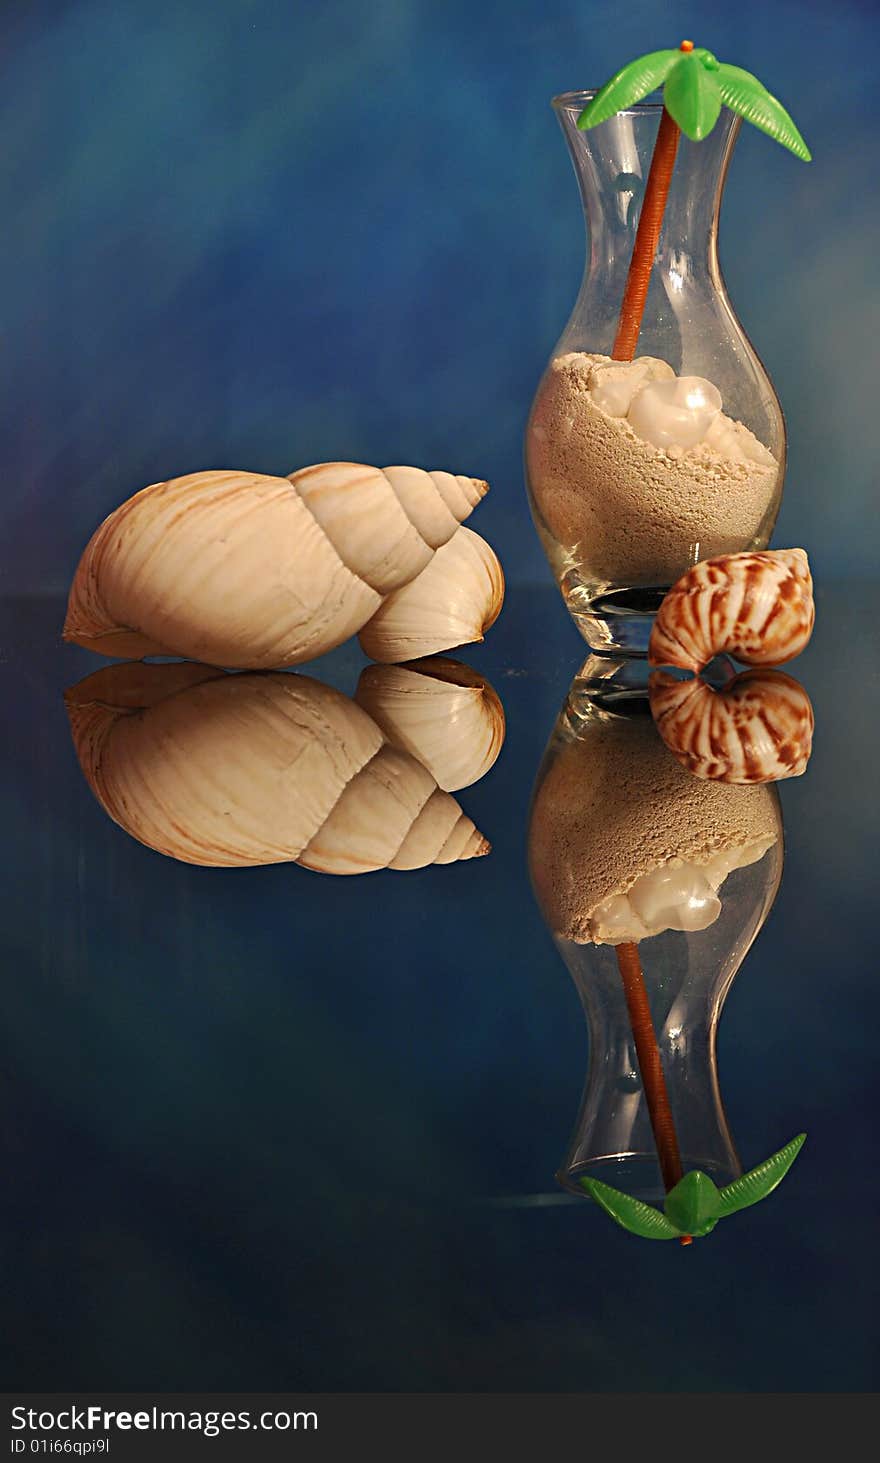 Tropic still life.Reflection of shells is in blue tones.